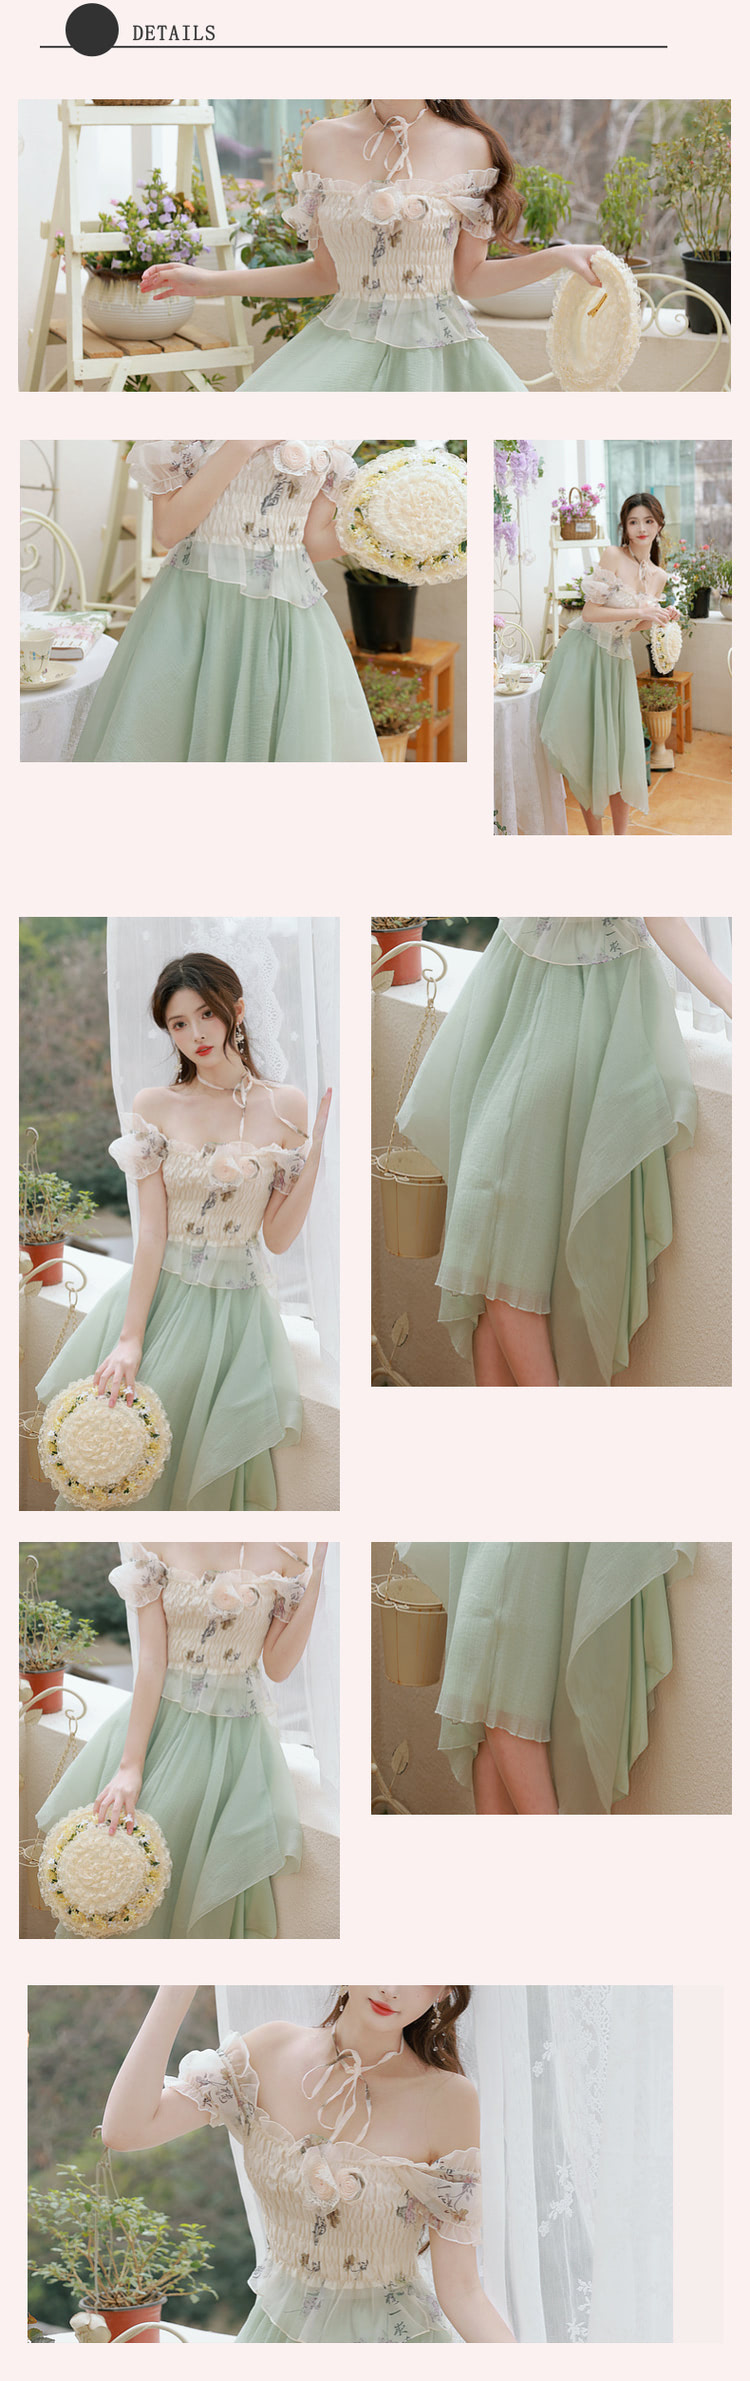 Fairy-Off-Shoulder-Top-with-Irregular-Skirt-Casual-Summer-Outfits09.jpg